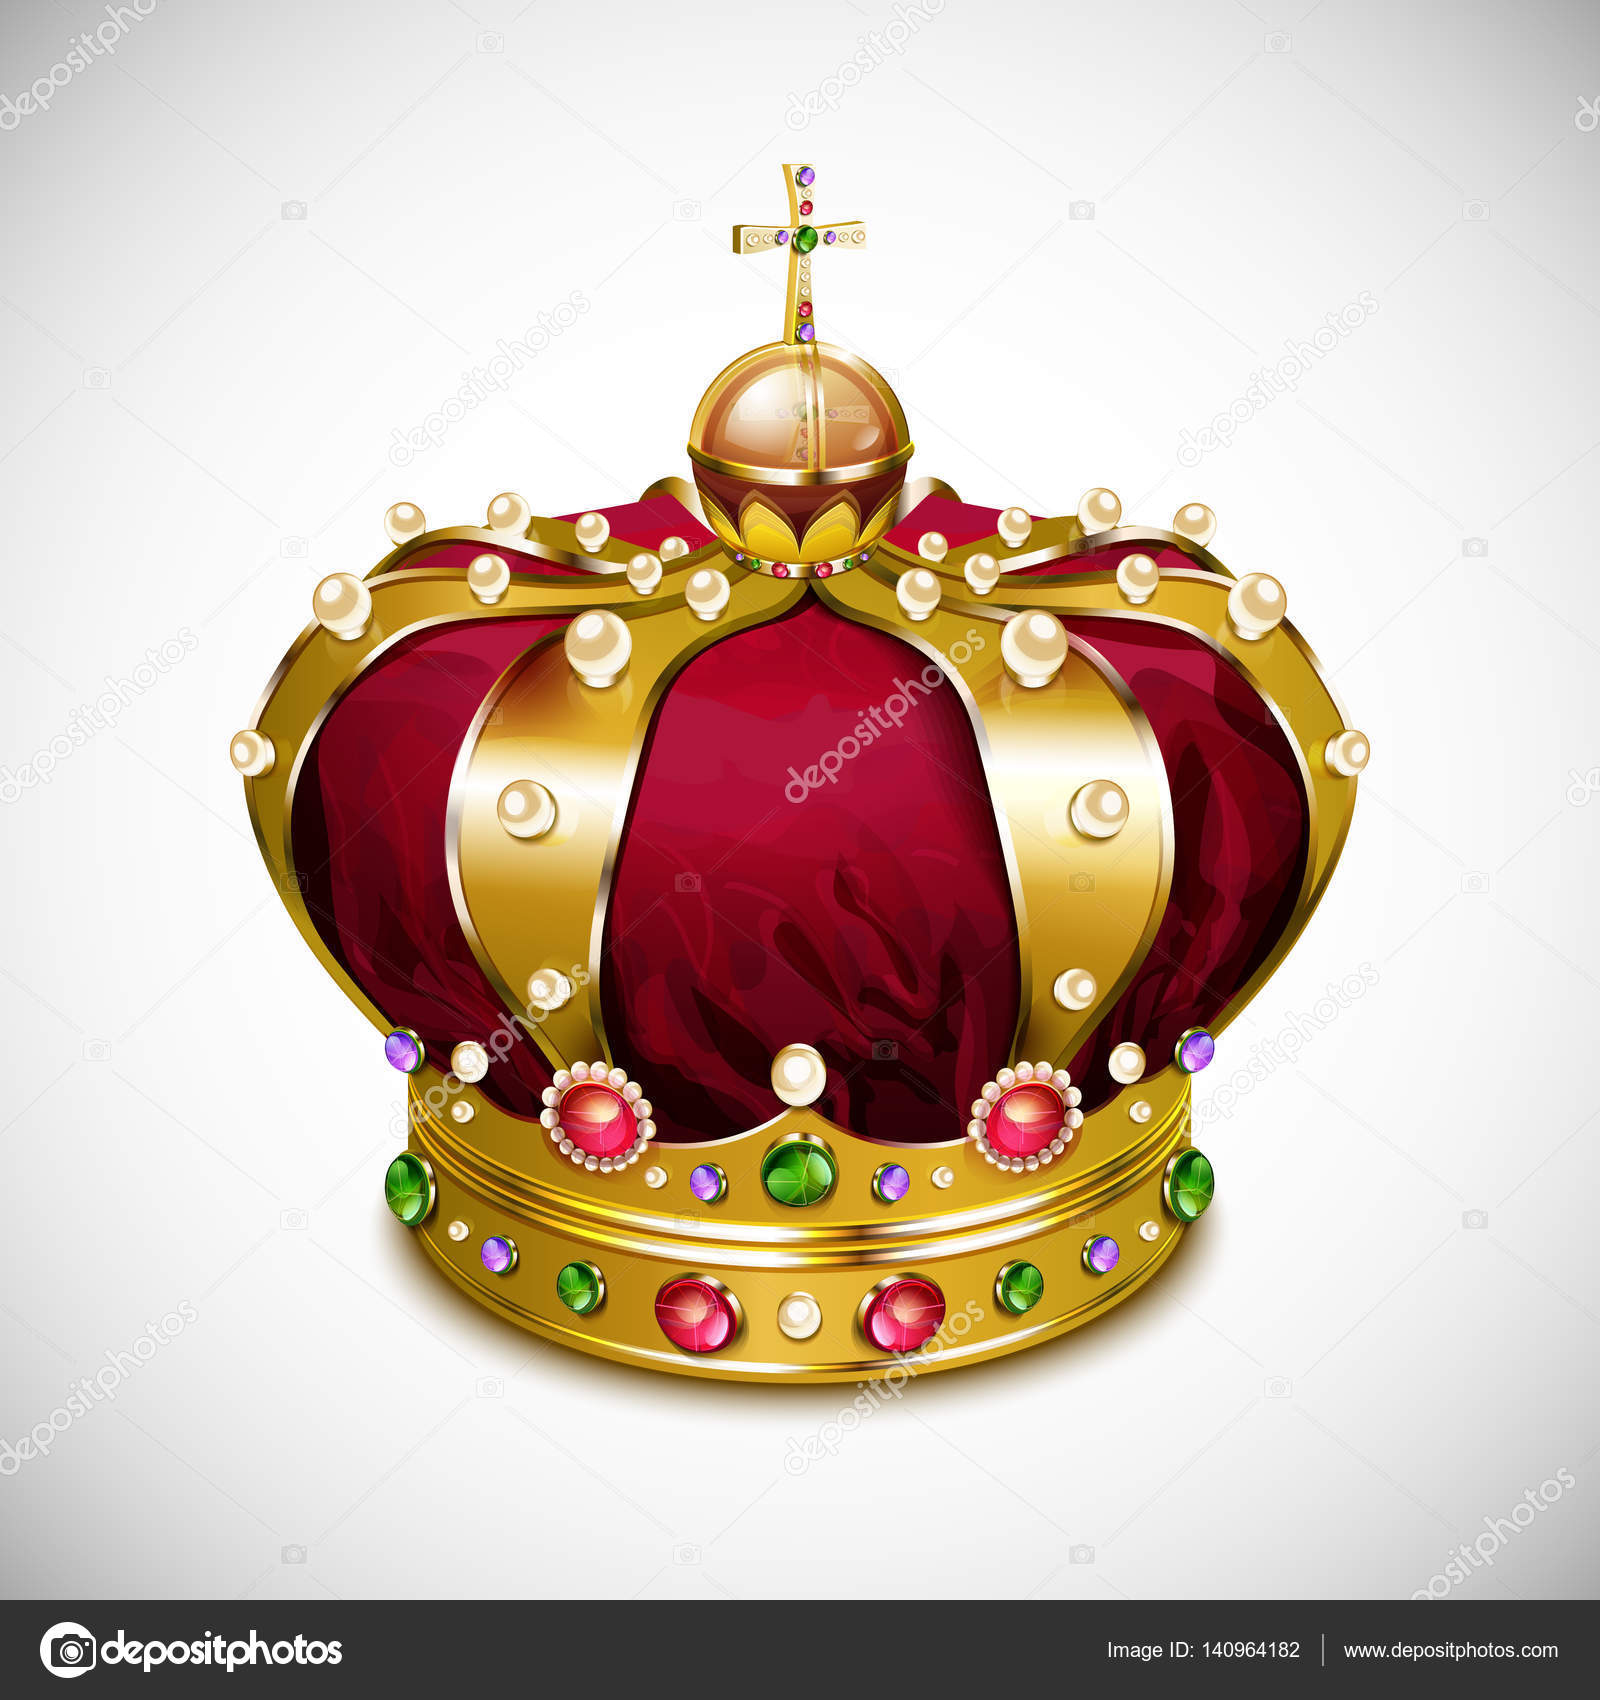 Download Gold king crown vector icon. — Stock Vector © indie #140964182